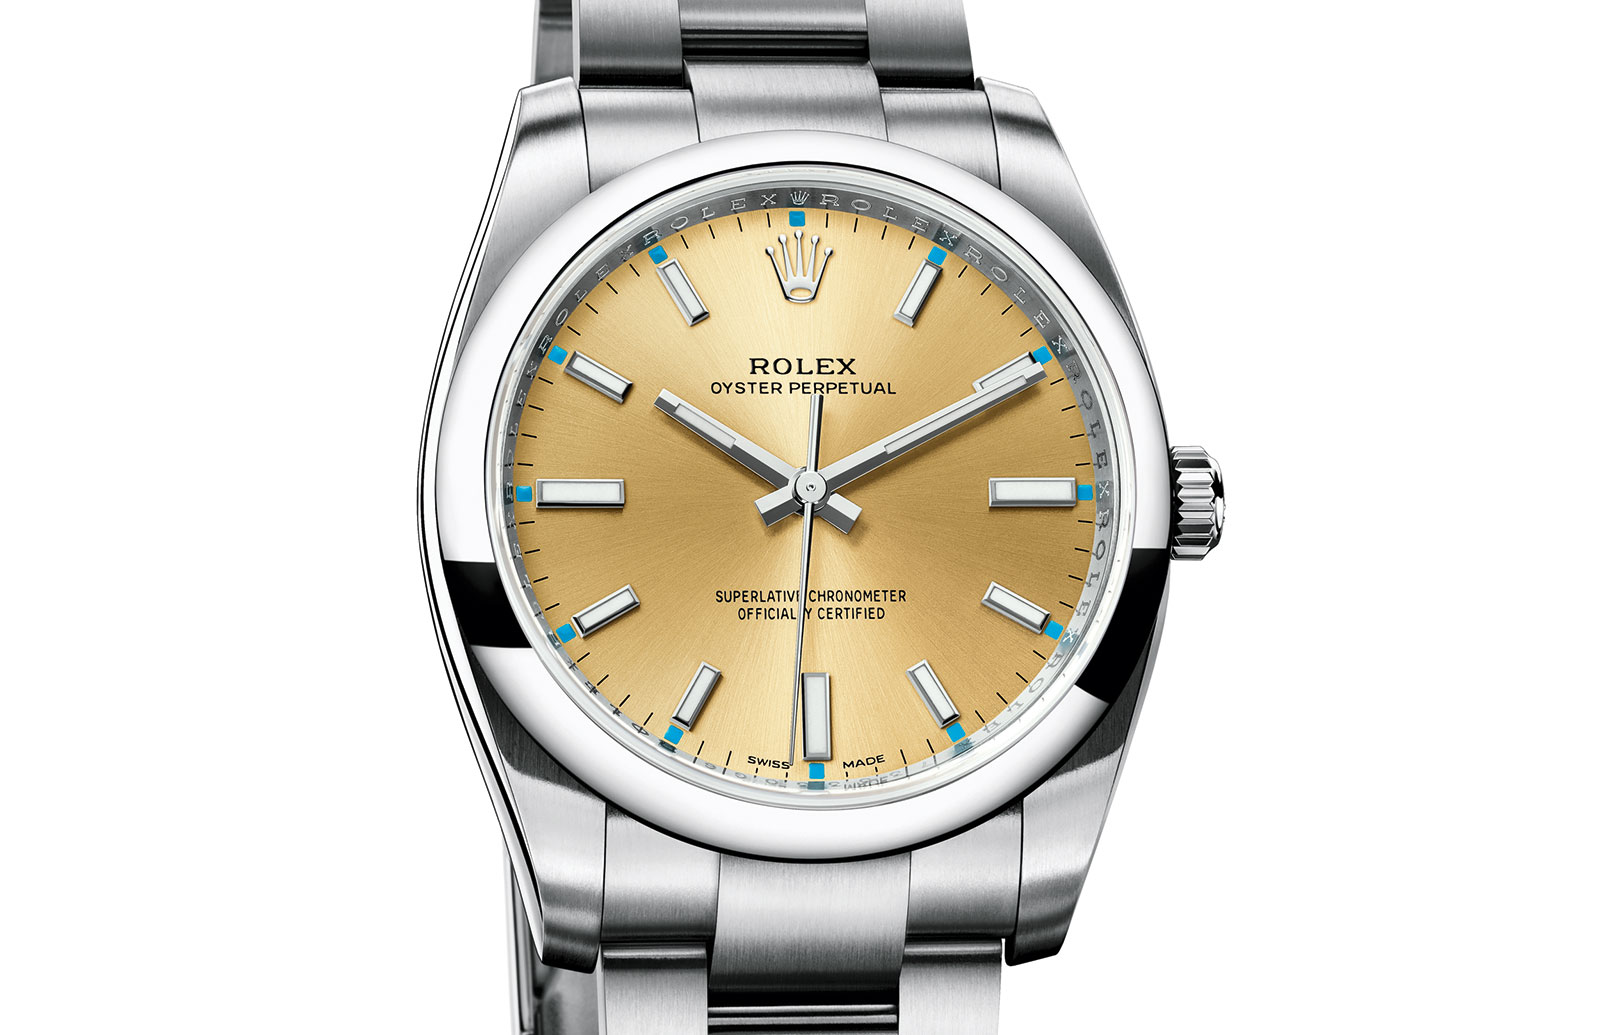 Rolex Introduces The Oyster Perpetual 